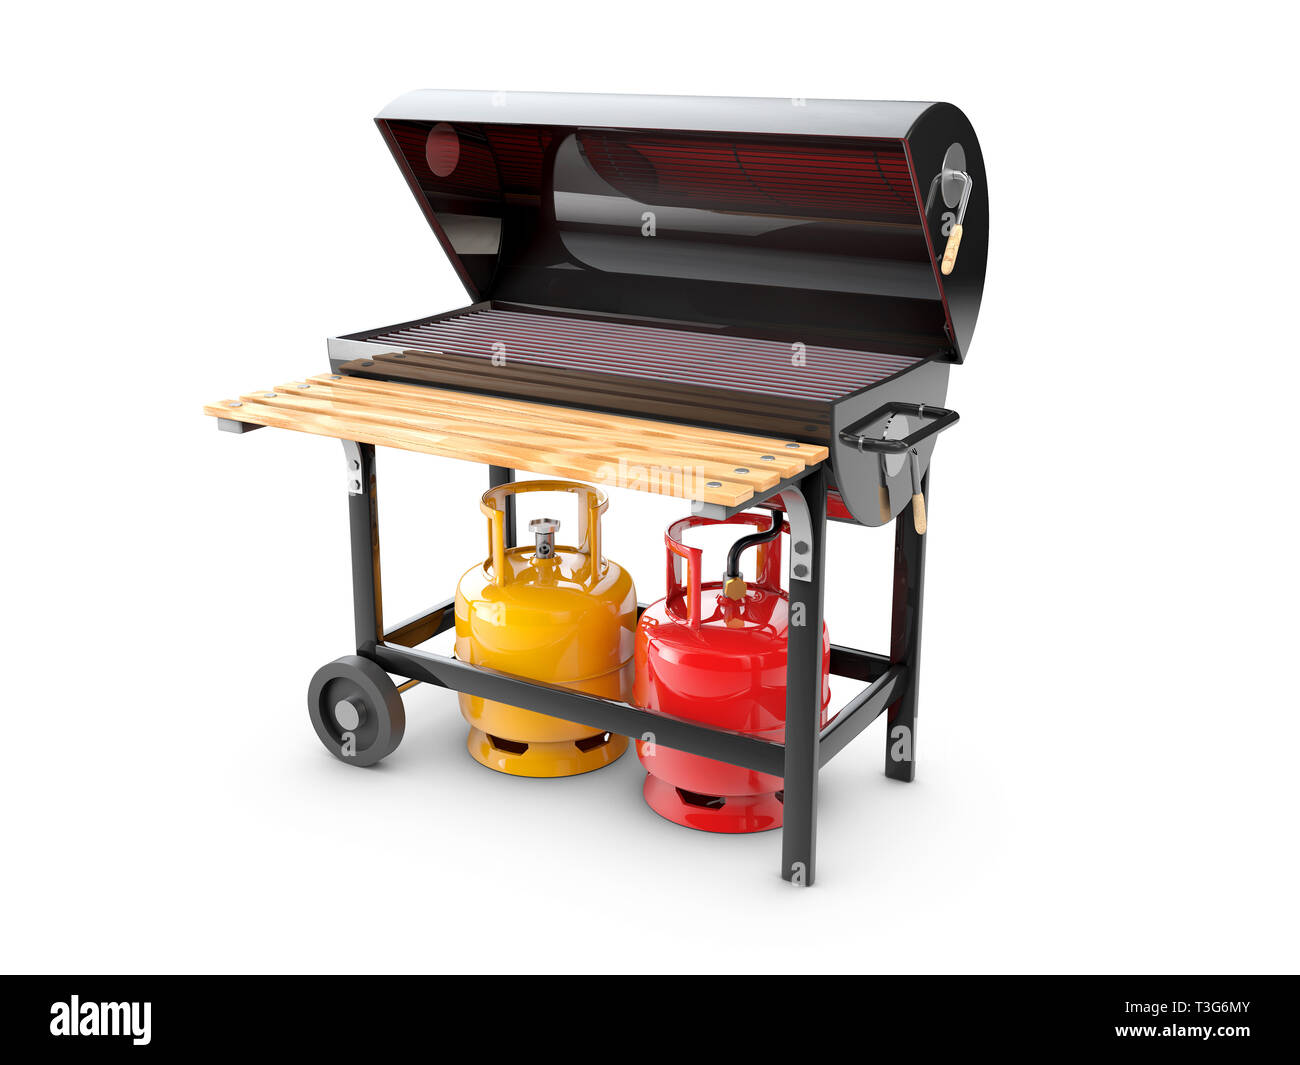 Propane Tank Grill High Resolution Stock Photography and Images - Alamy